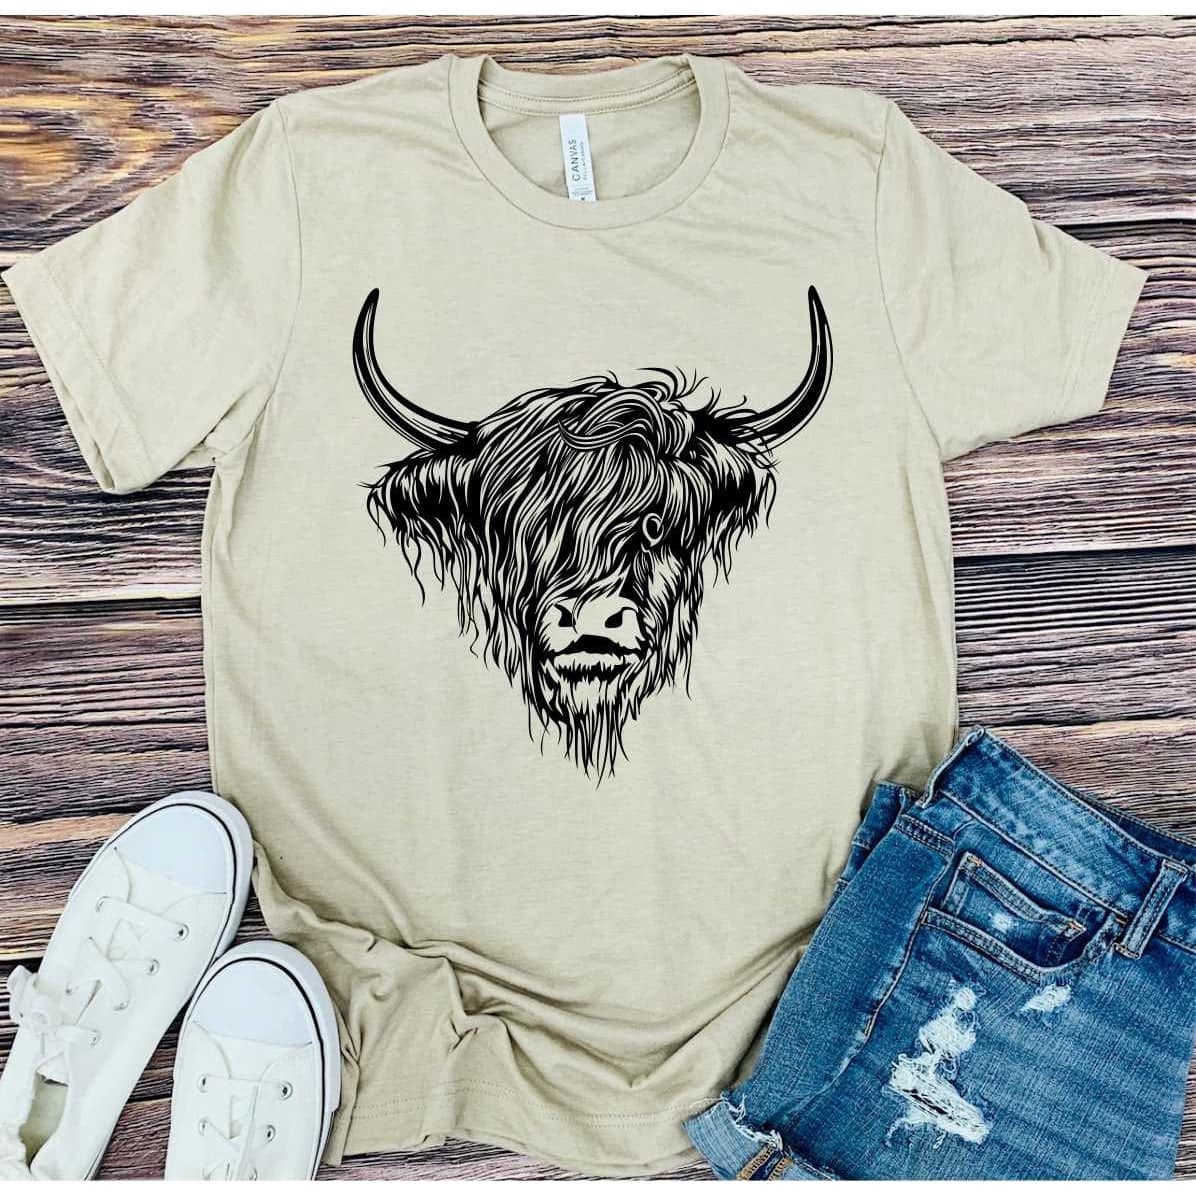 Highland Cow Graphic Tee.